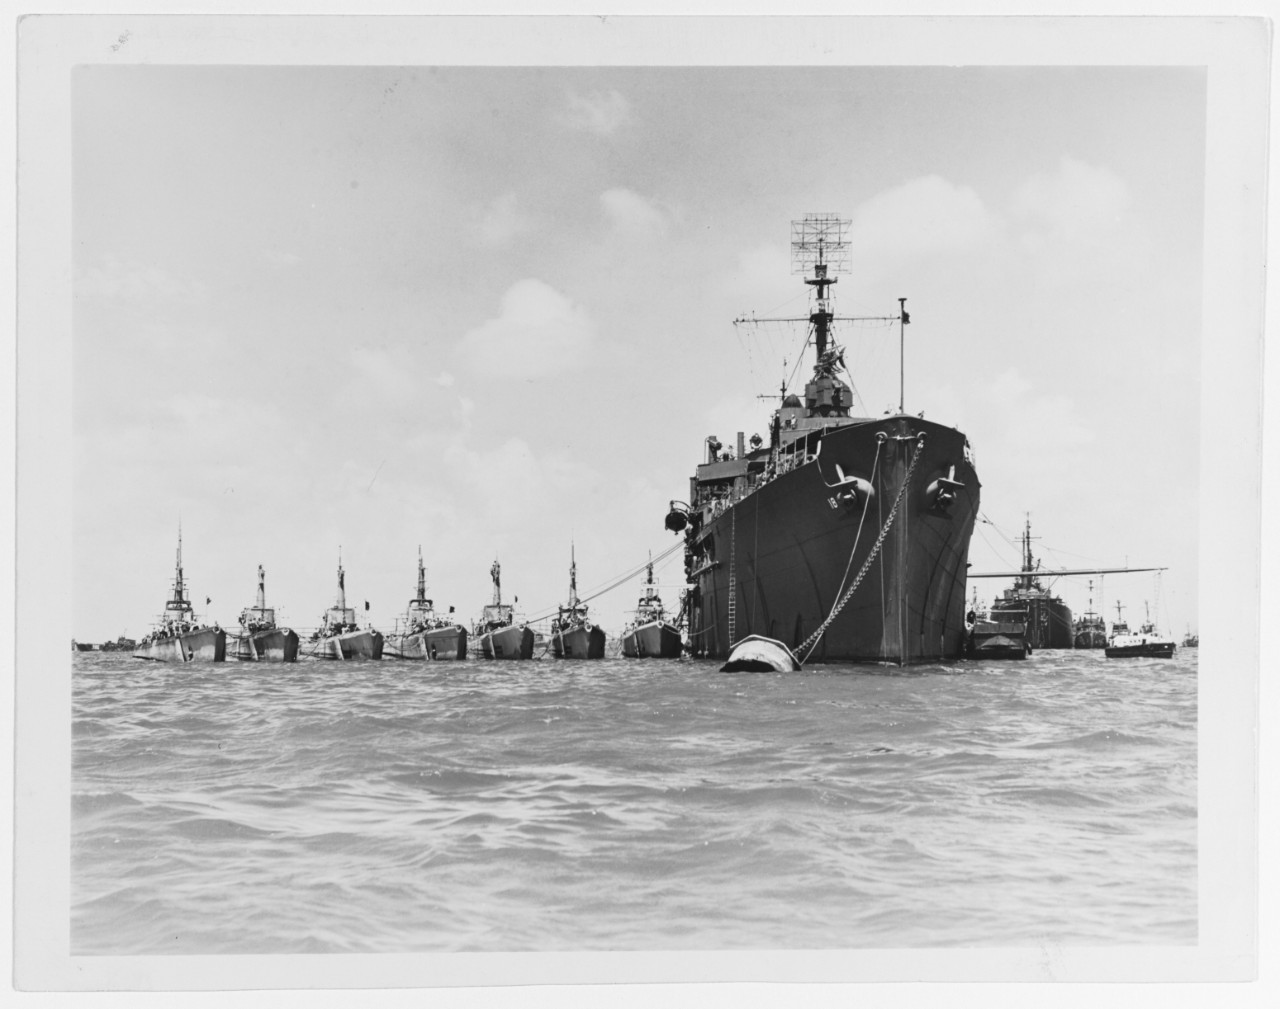 USS ORION (AS-18)